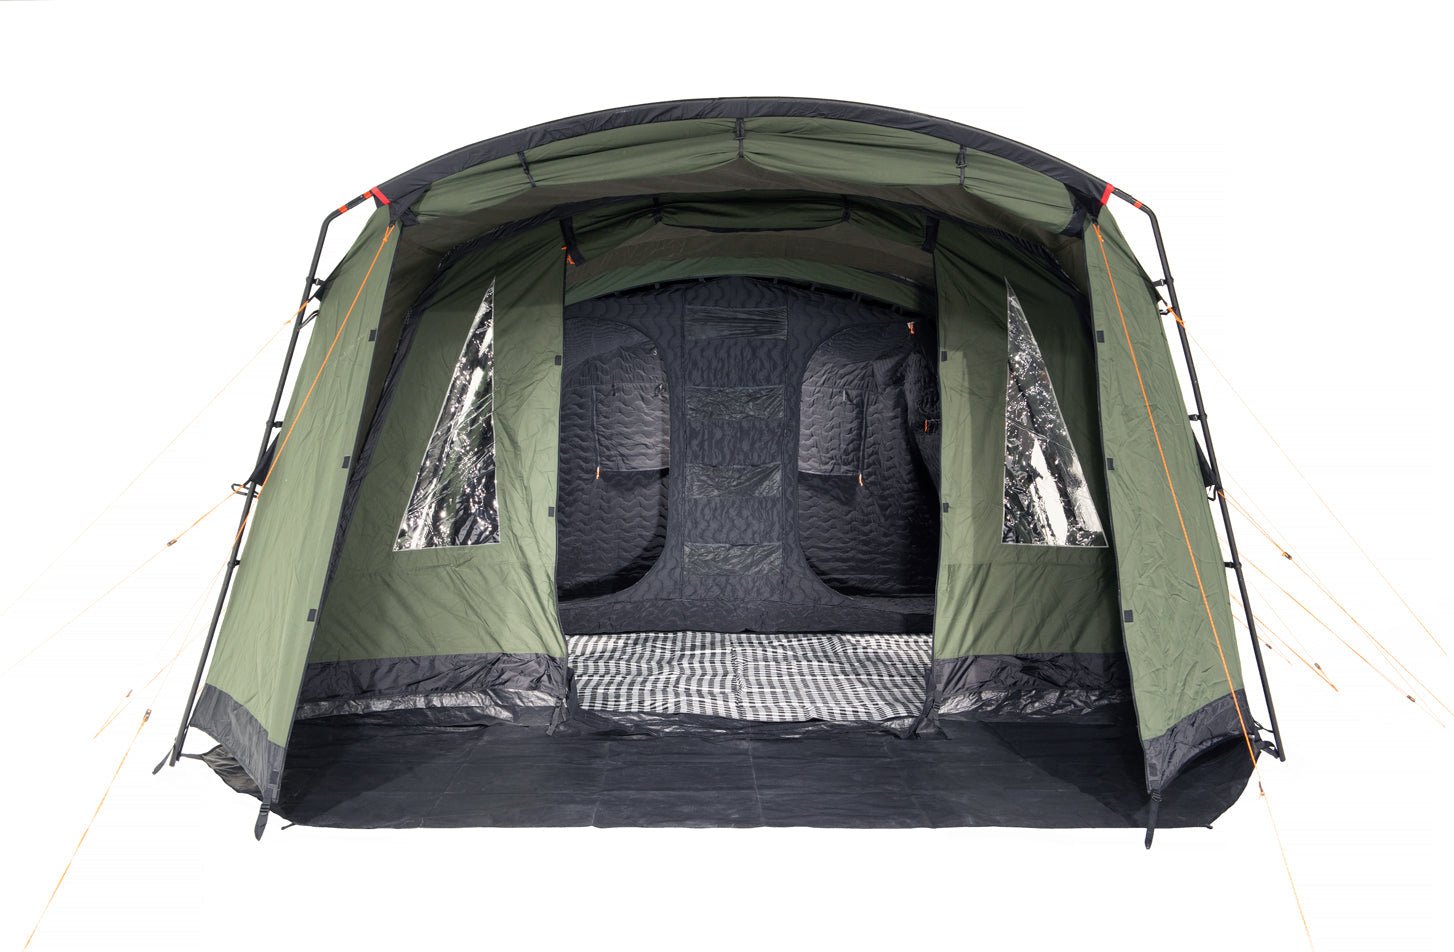 Crua Outdoors - LOJ | 6 PERSON INSULATED TENT - ALL WEATHER COMPATIBLE, WATERPROOF - Angler's Pro Tackle & Outdoors